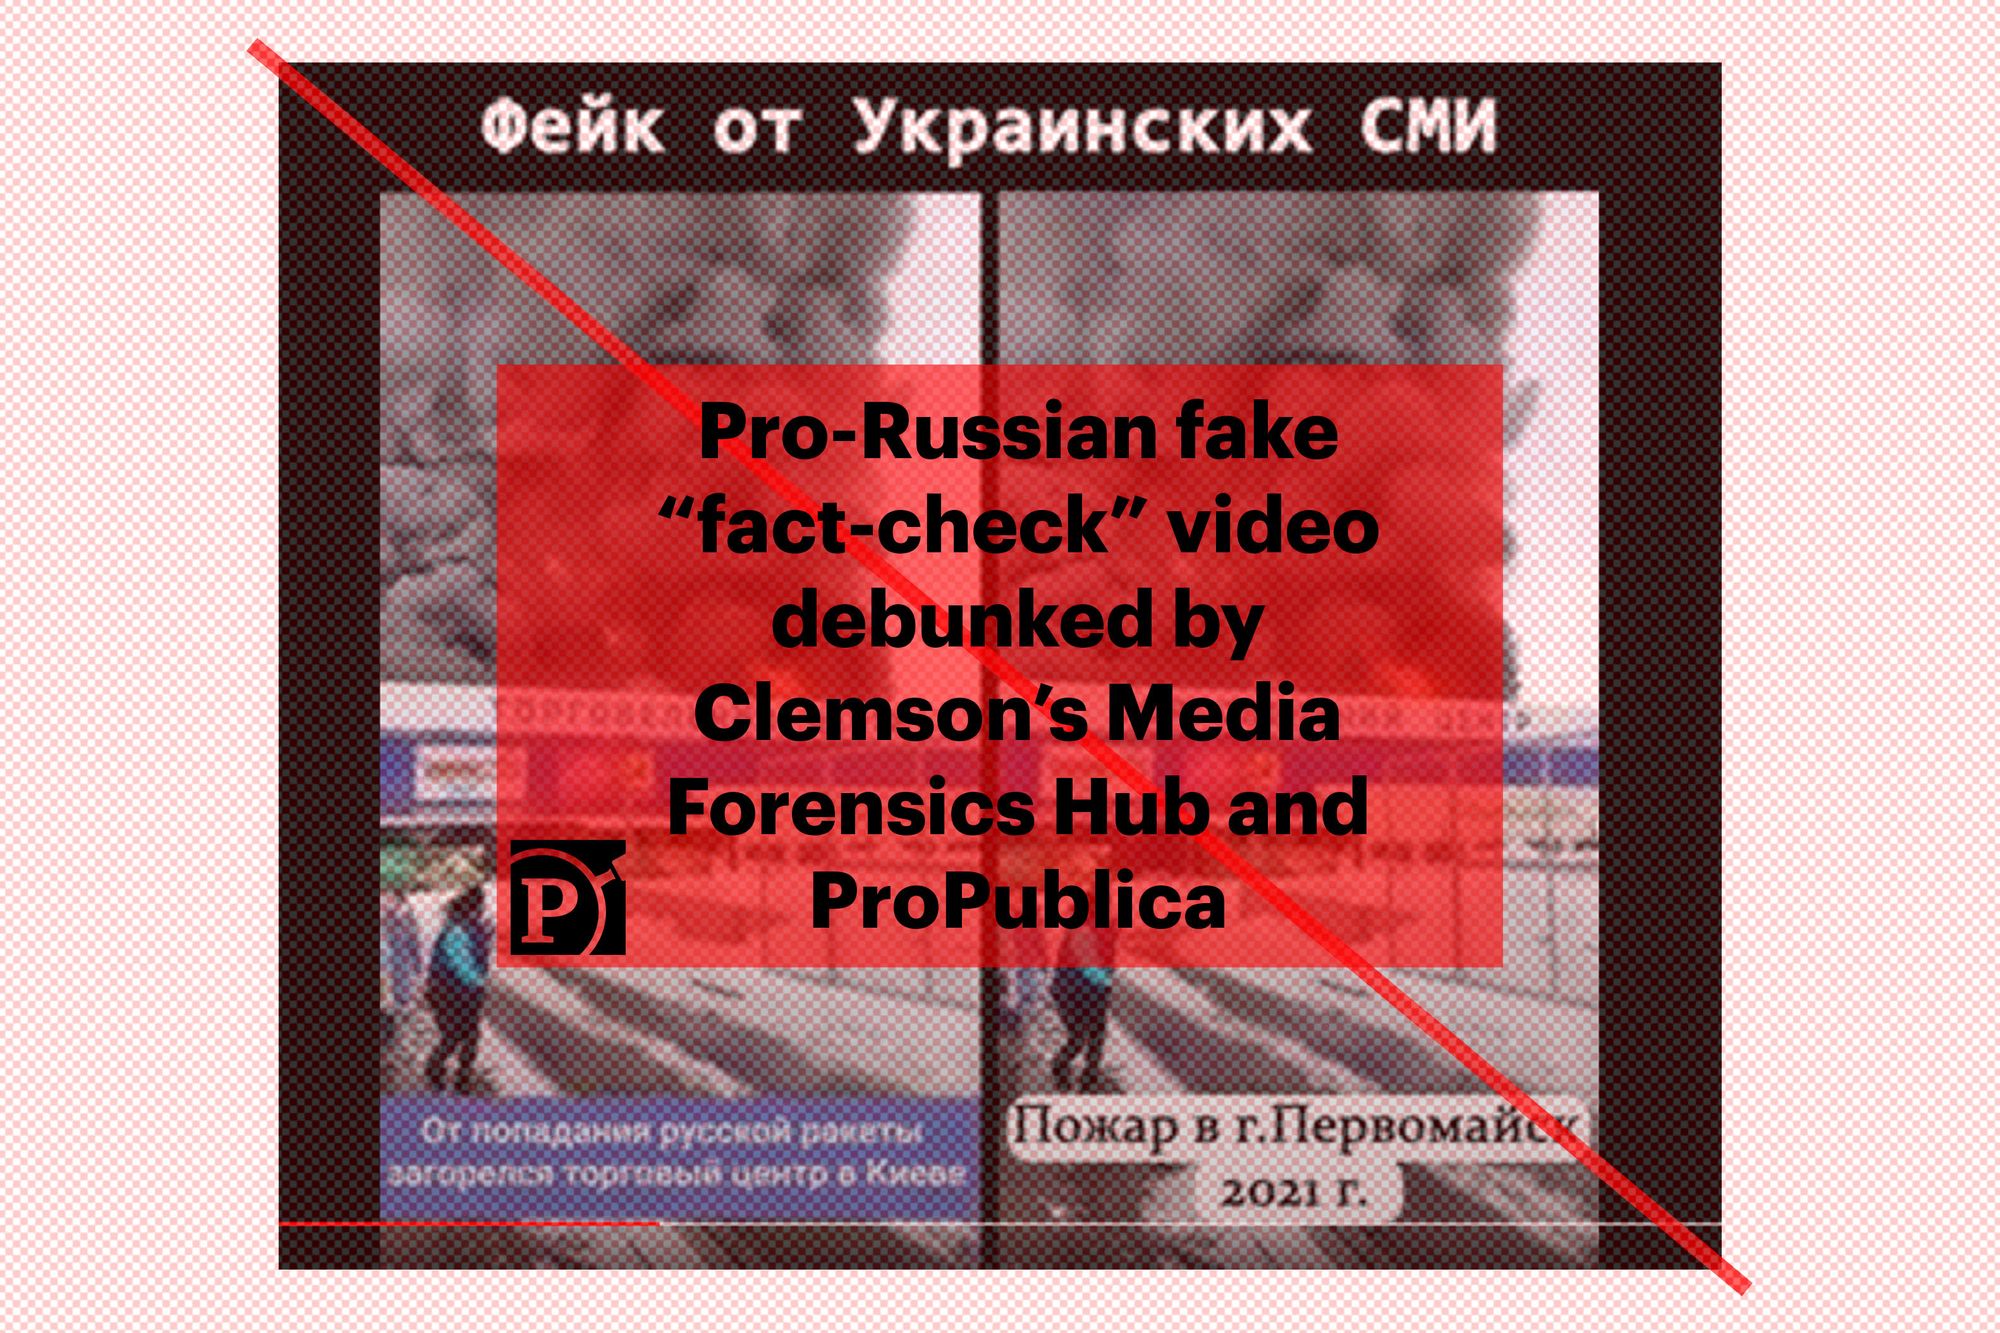 In the Ukraine conflict, fake fact-checks are being used to spread disinformation